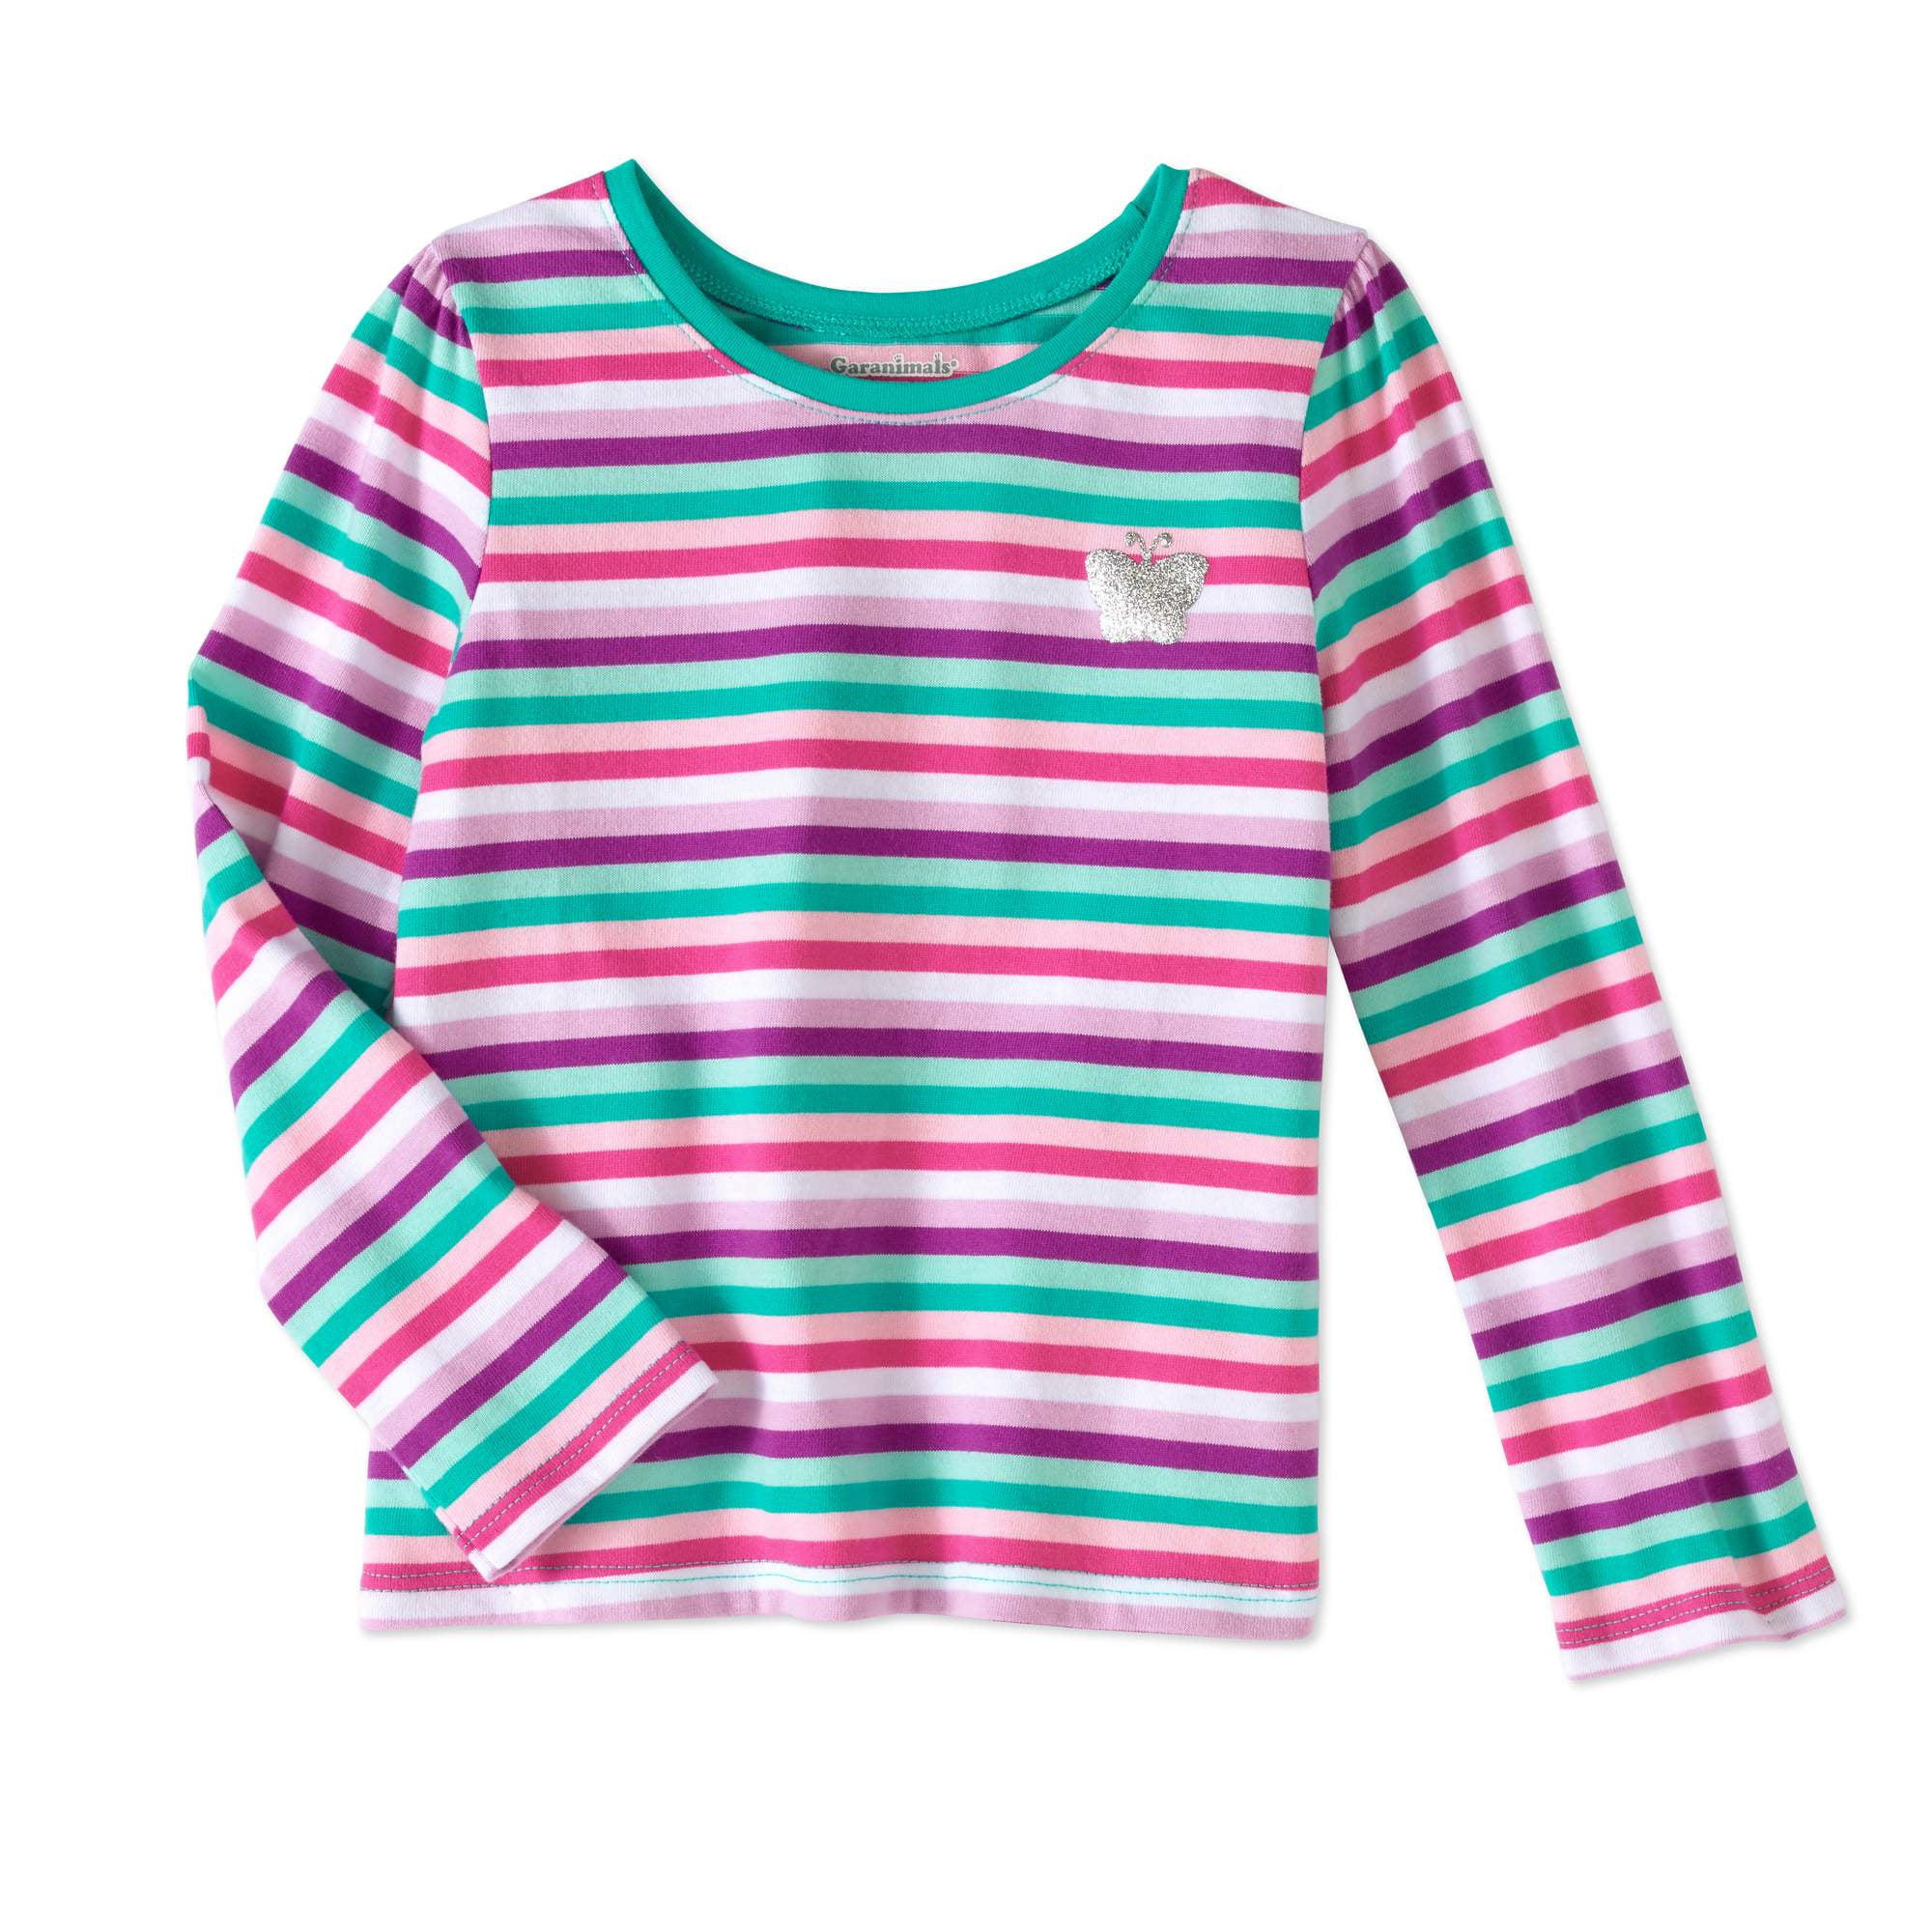 Long Sleeve Cotton Striped T-Shirt for Kids/Toddlers 